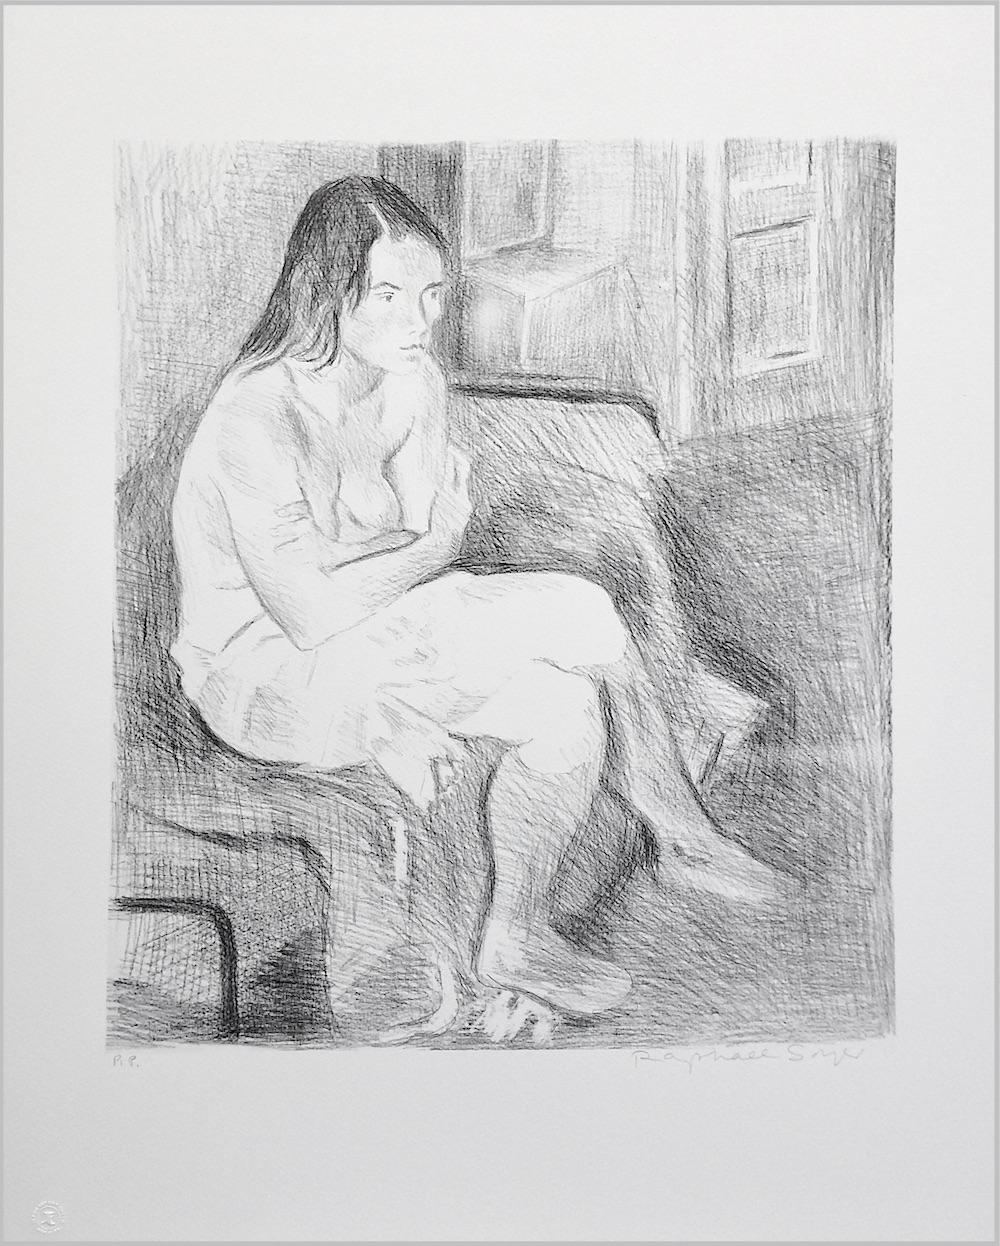 SEATED WOMAN ON BED, KNEE SOCKS Signed Lithograph, Female Portrait Drawing - Print by Raphael Soyer